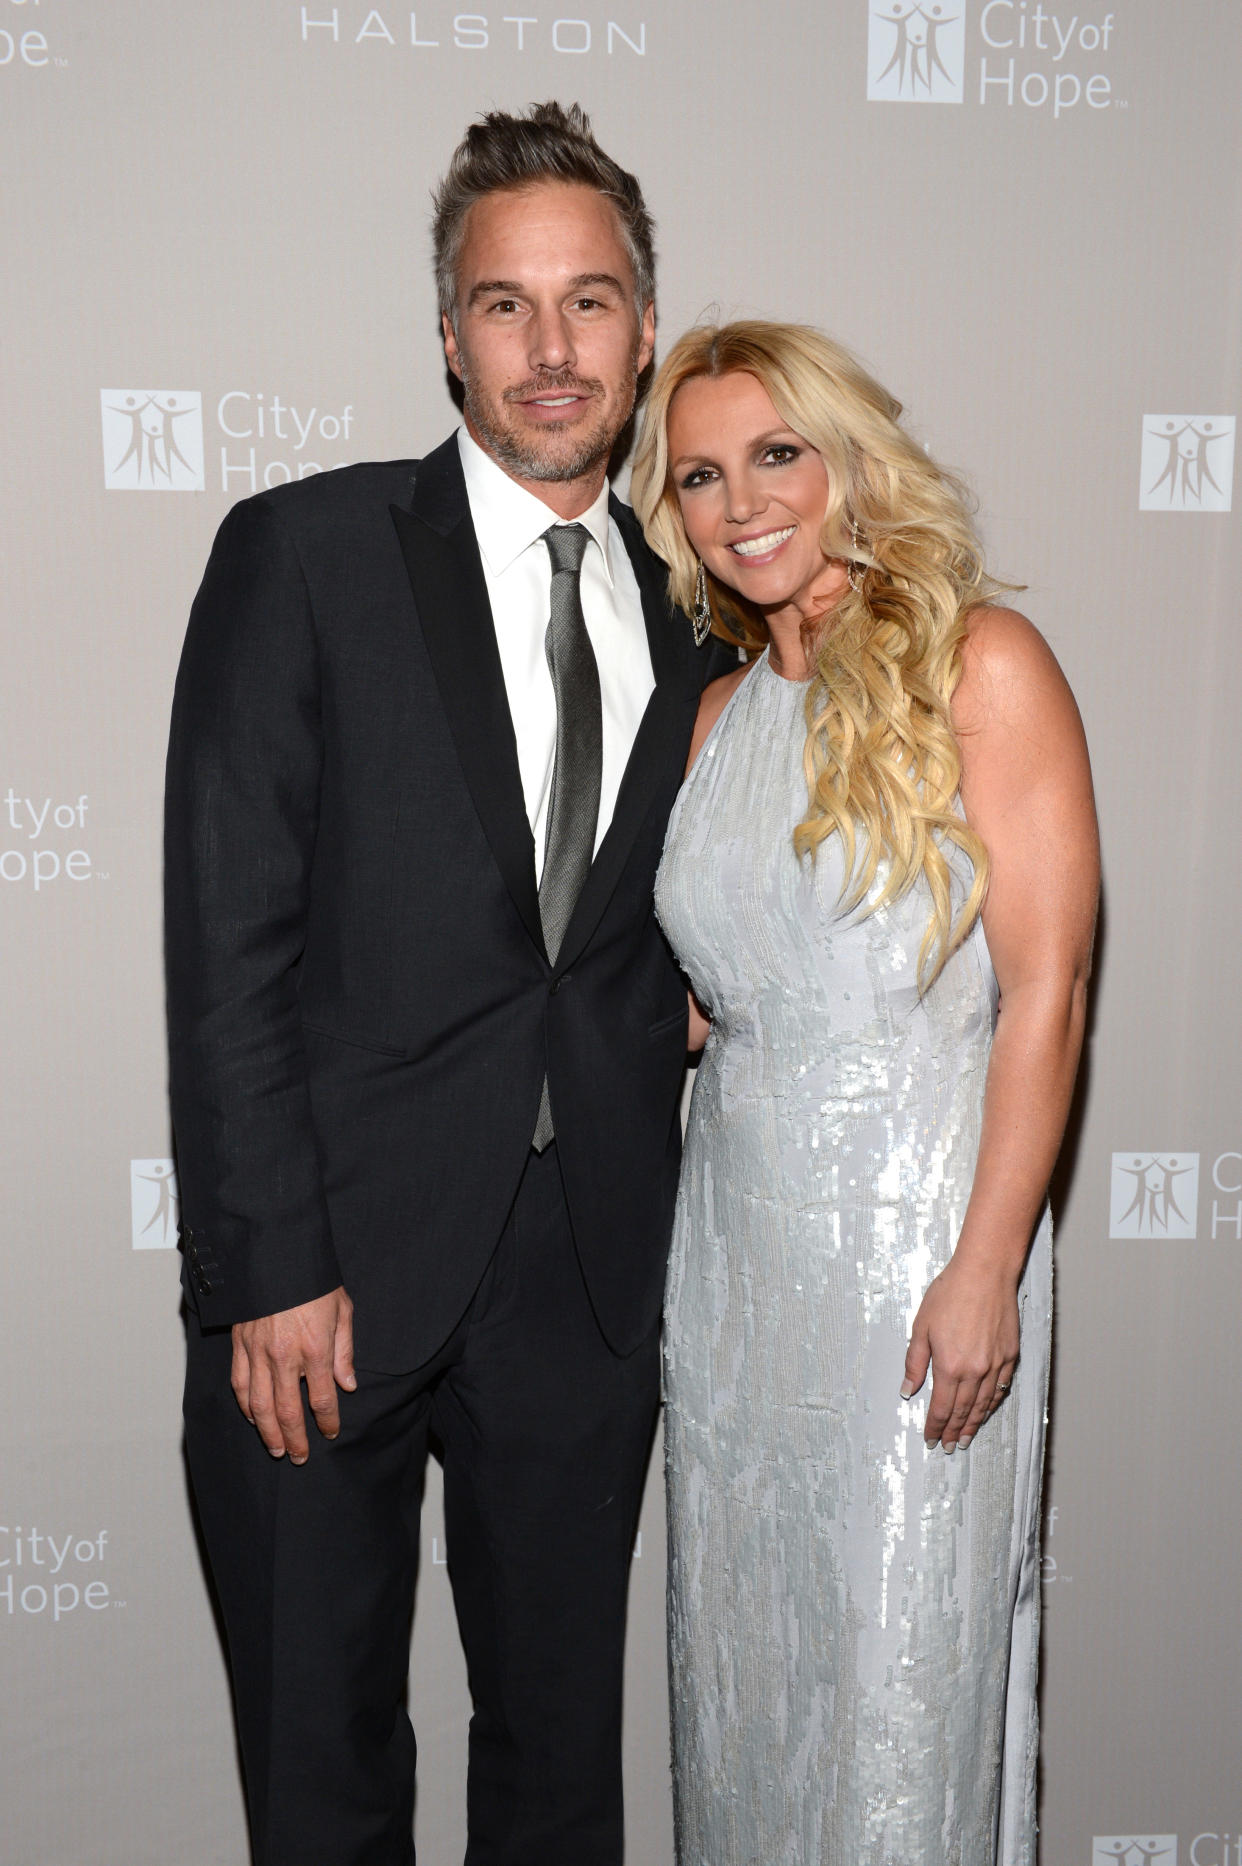 LOS ANGELES, CA - OCTOBER 10:  Jason Trawick and Britney Spears attend City Of Hope Honors Halston CEO Ben Malka With Spirit Of Life Award - Red Carpet at Exchange LA on October 10, 2012 in Los Angeles, California.  (Photo by Michael Kovac/Getty Images for City of Hope)